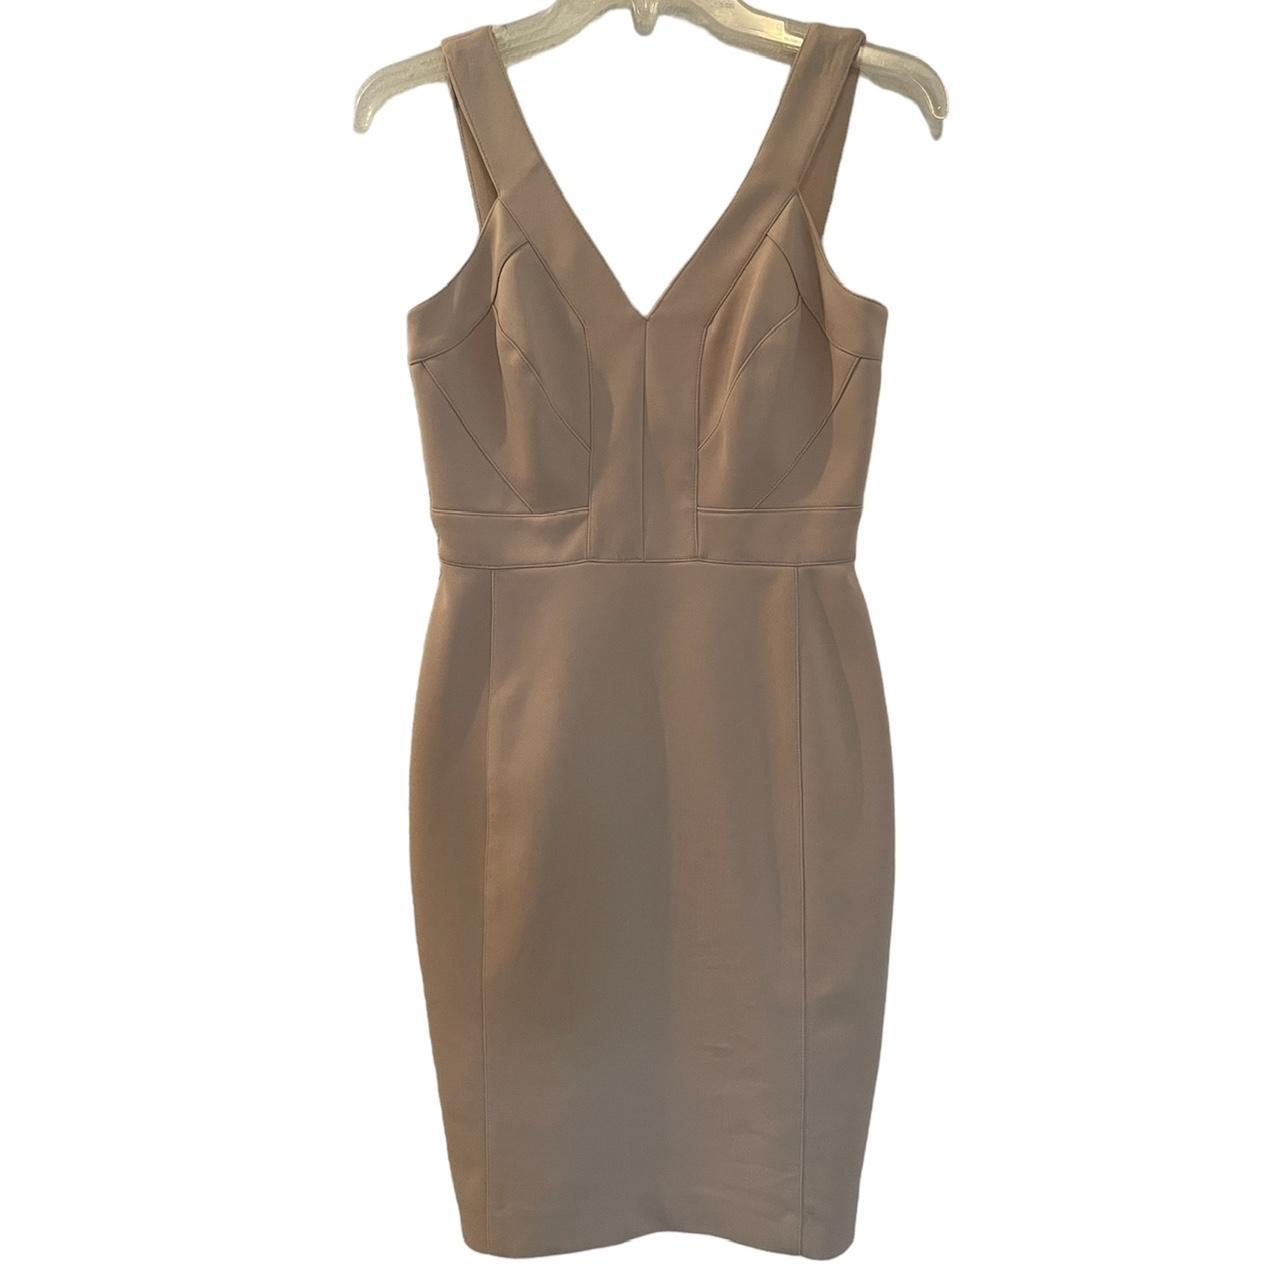 Vince Camuto Women's Tan and Cream Dress